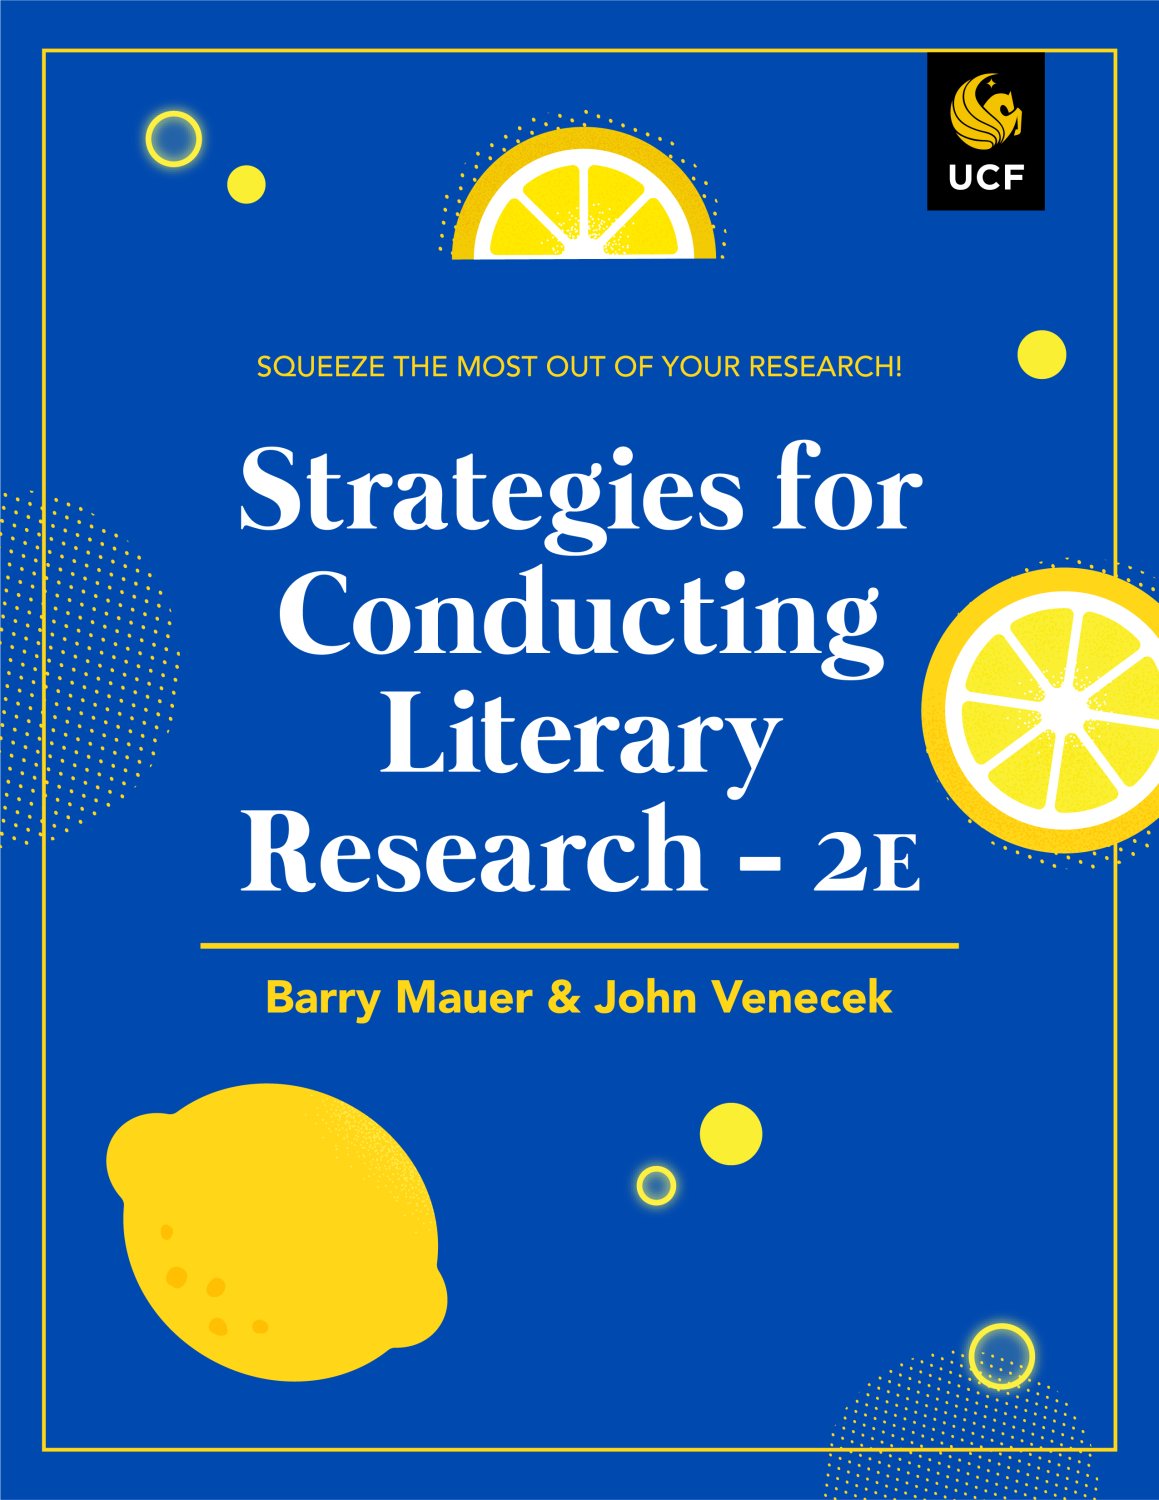 Book Cover: Strategies for Conducting Literary Research by Barry Mauer and John Venecek